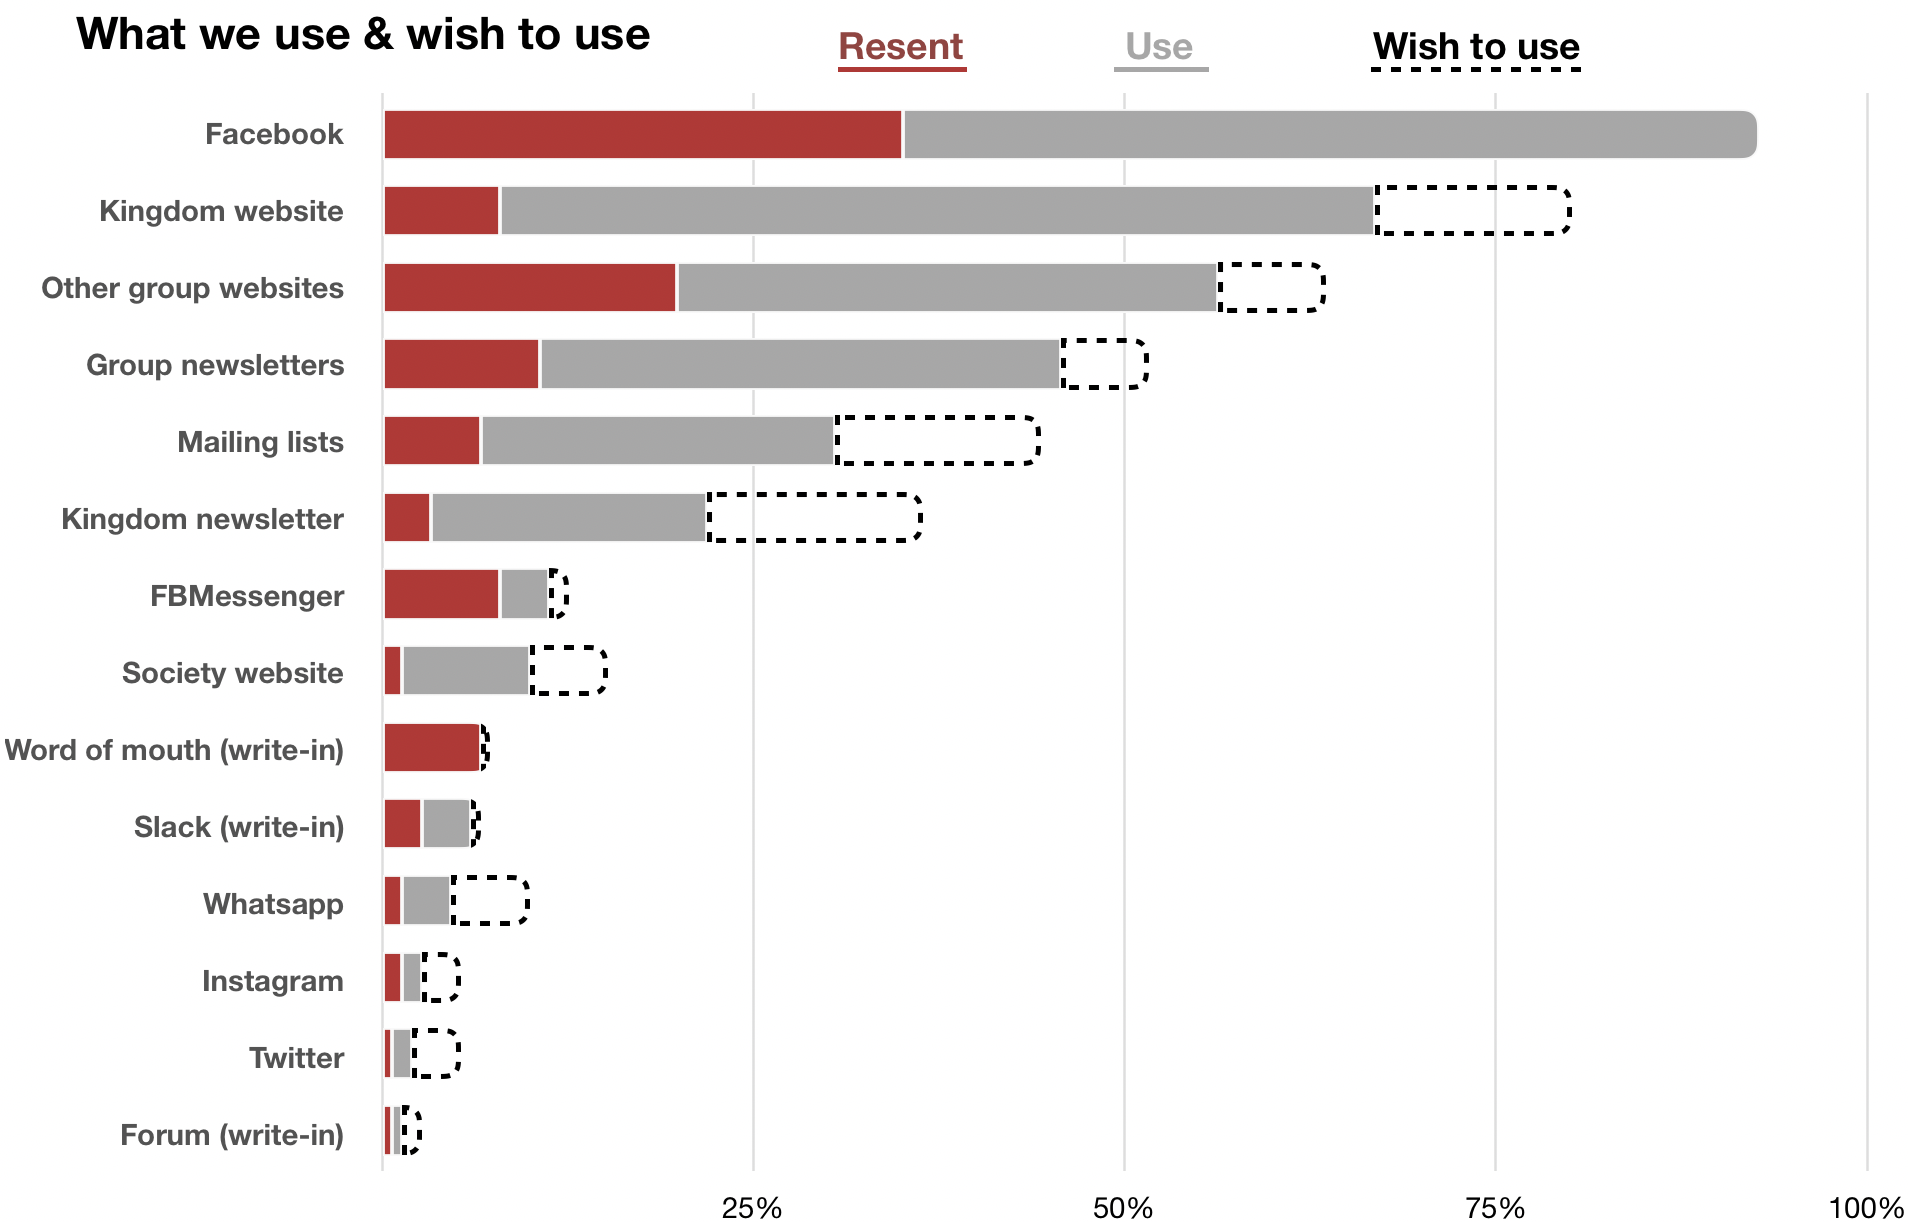 Chart: Resent, Use and Wish to use over all responses